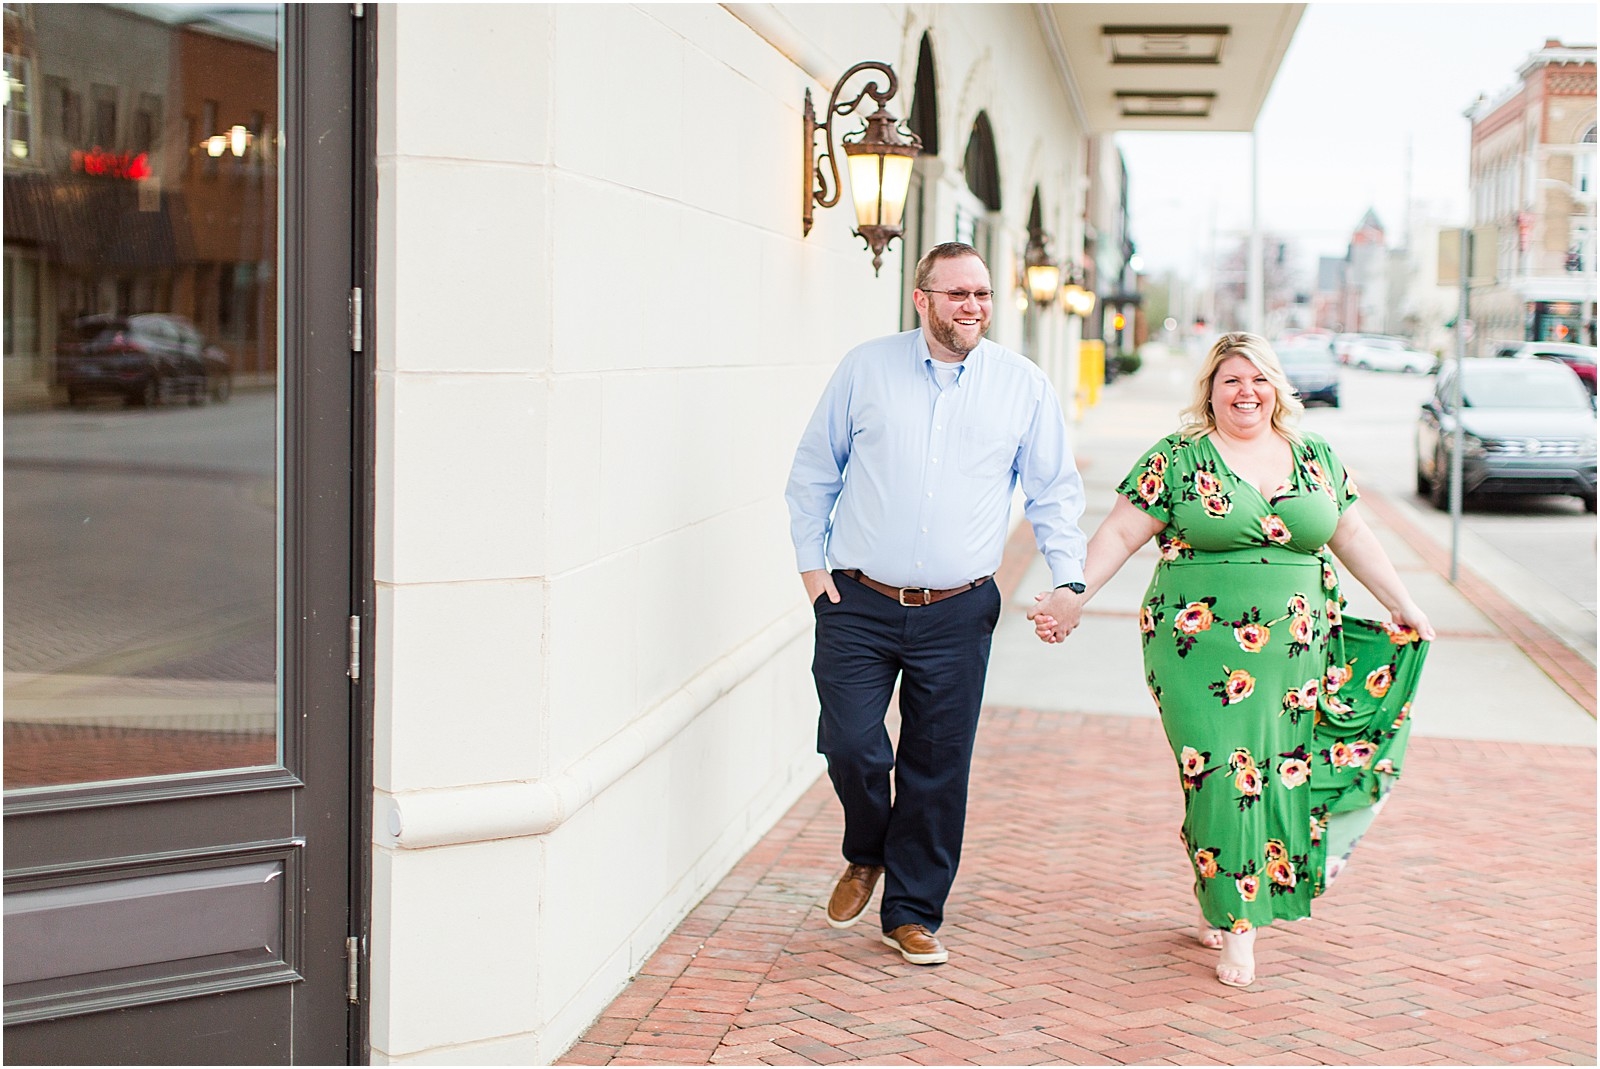 A Downtown Owensboro Engagement Session | Brittany and Neil | Engaged | | 0026.jpg